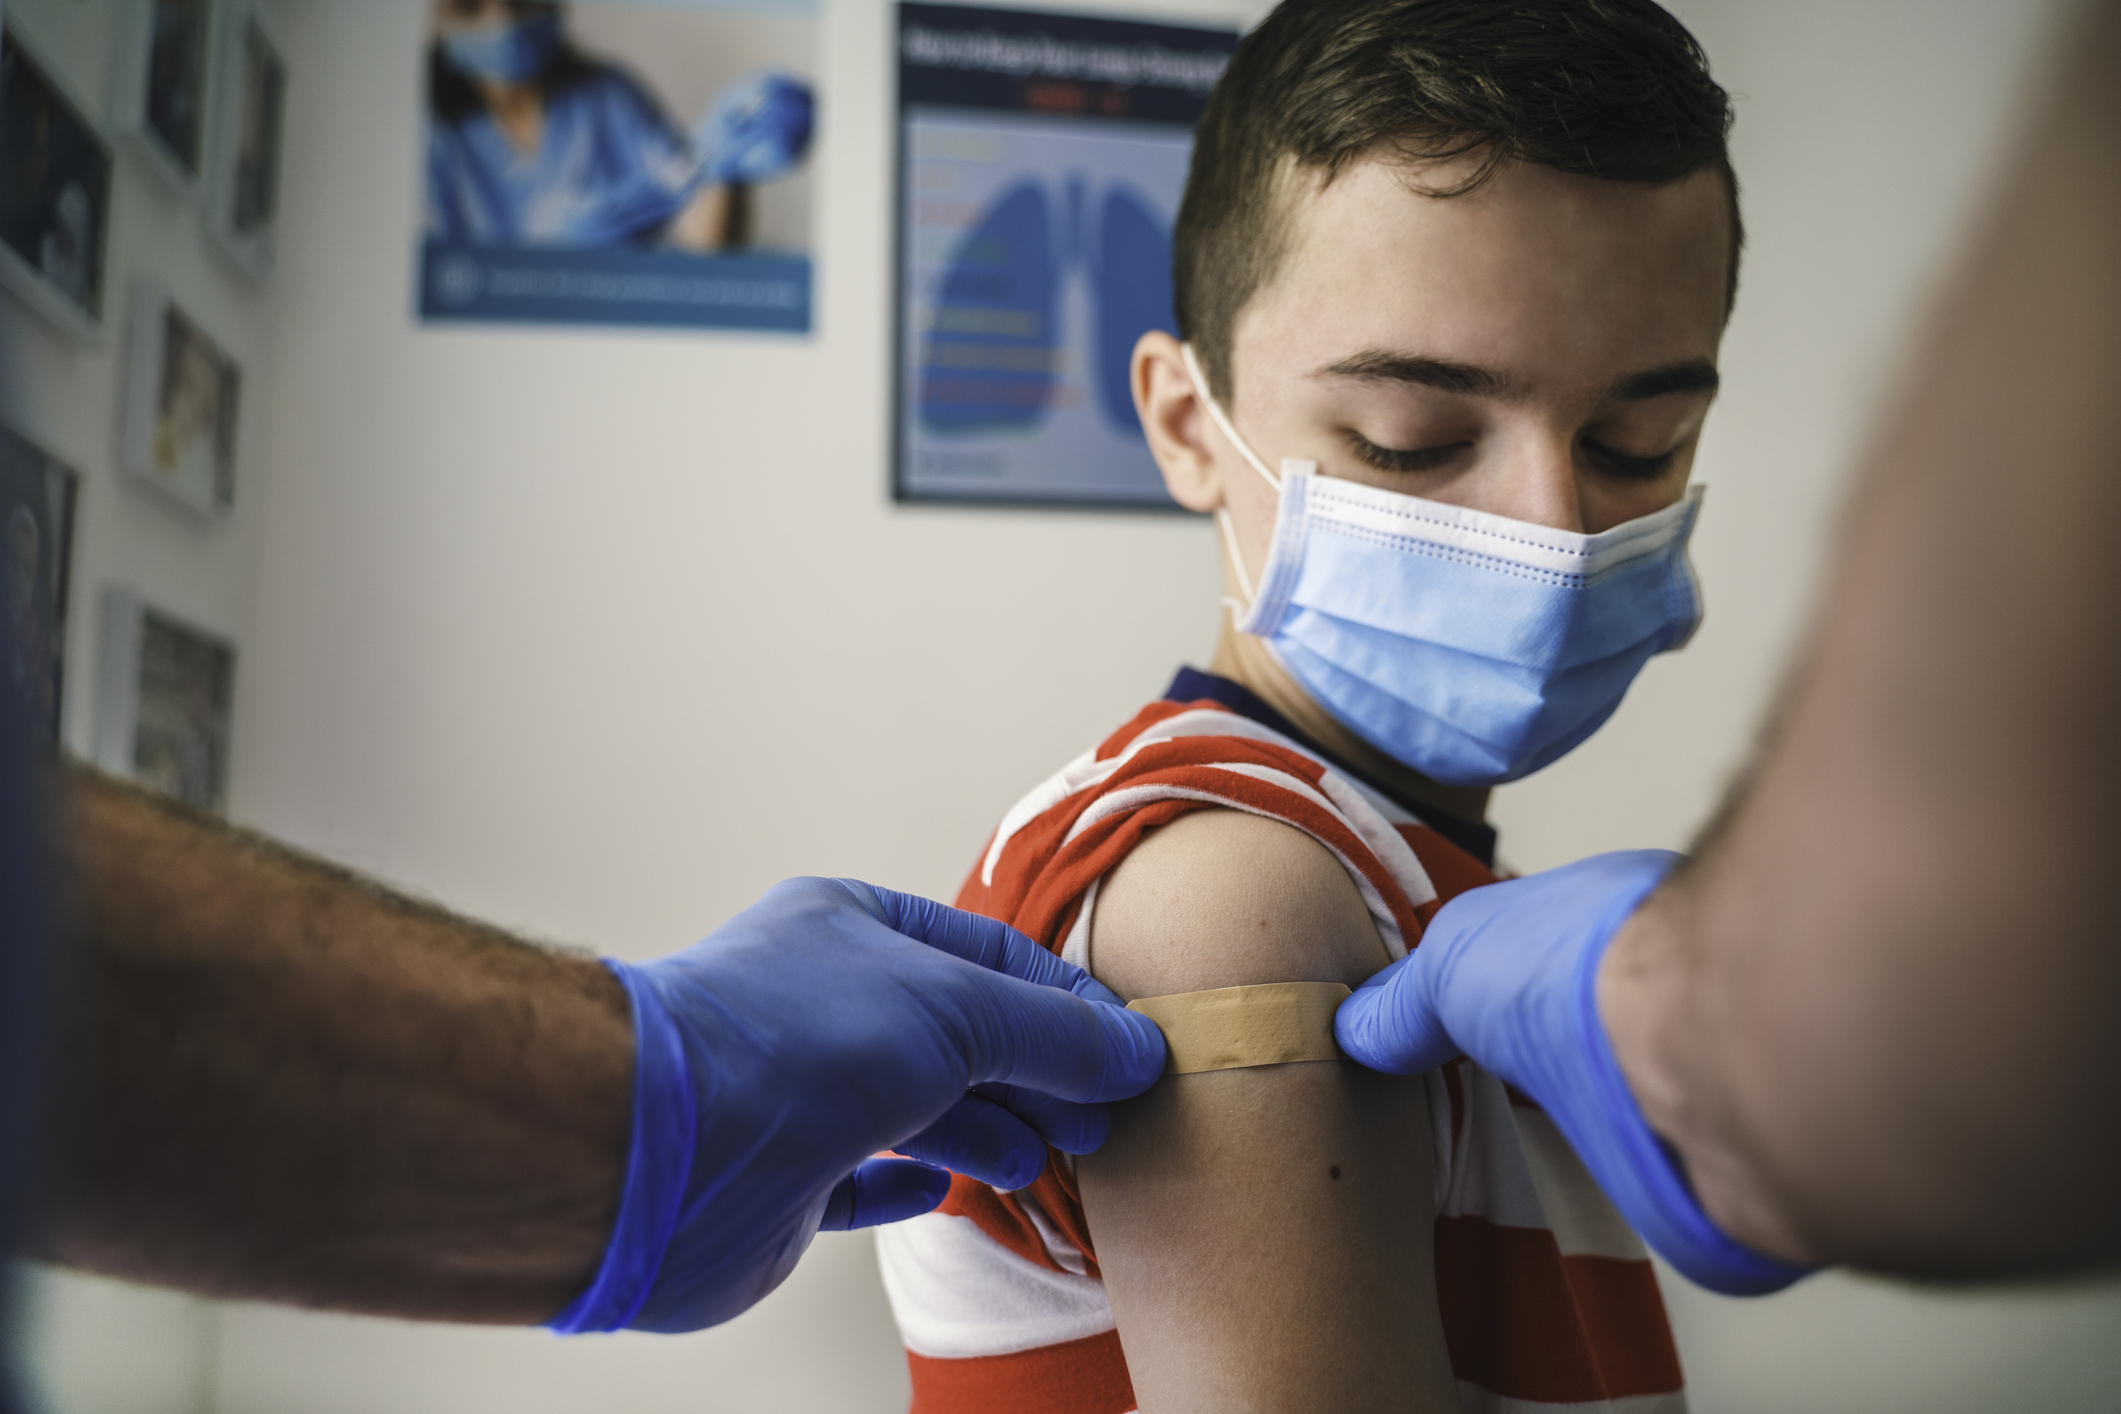 A child receives a bandage after receiving a shot.